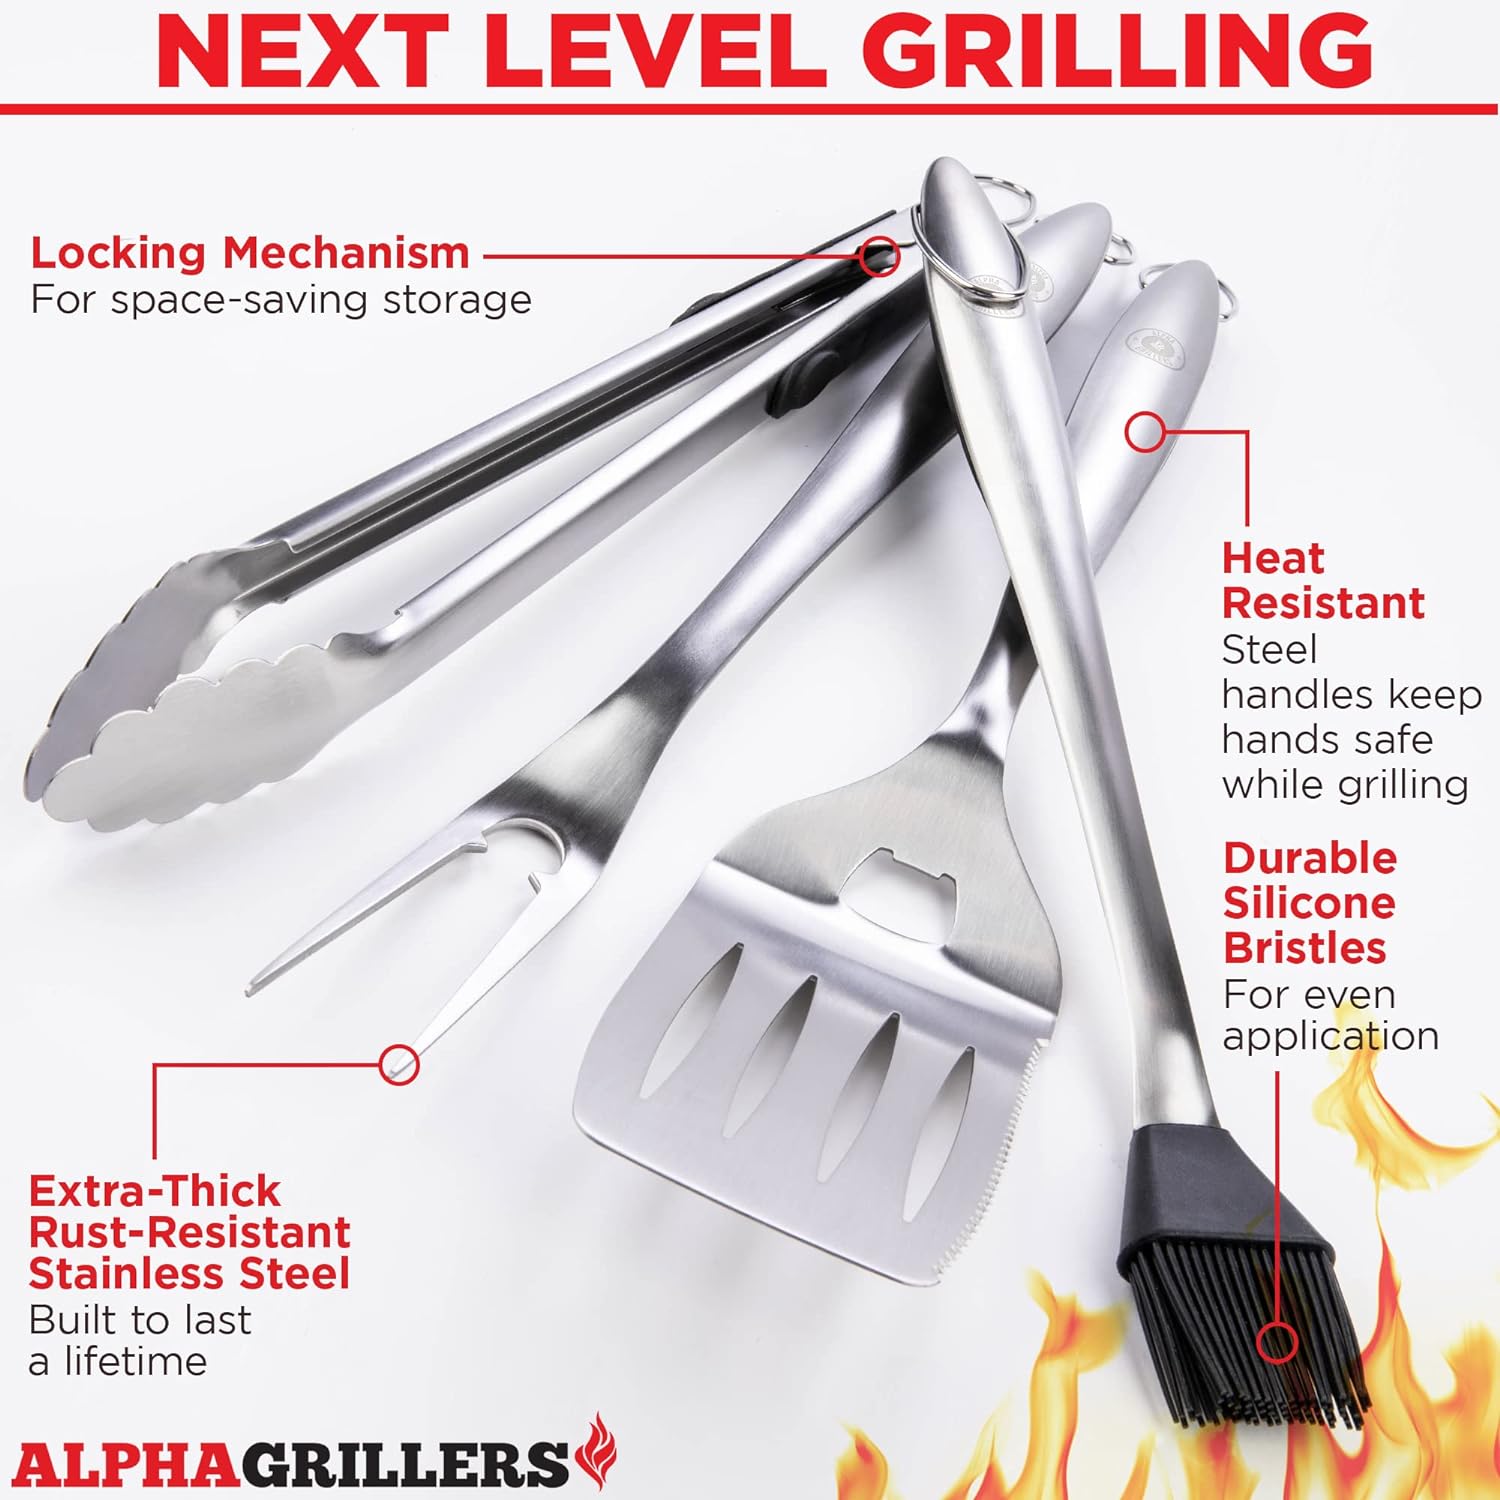 Premium BBQ Grilling Tools Set. Extremely Heavy Duty Stainless Steel Spatula, Locking Tongs and Fork Accessories